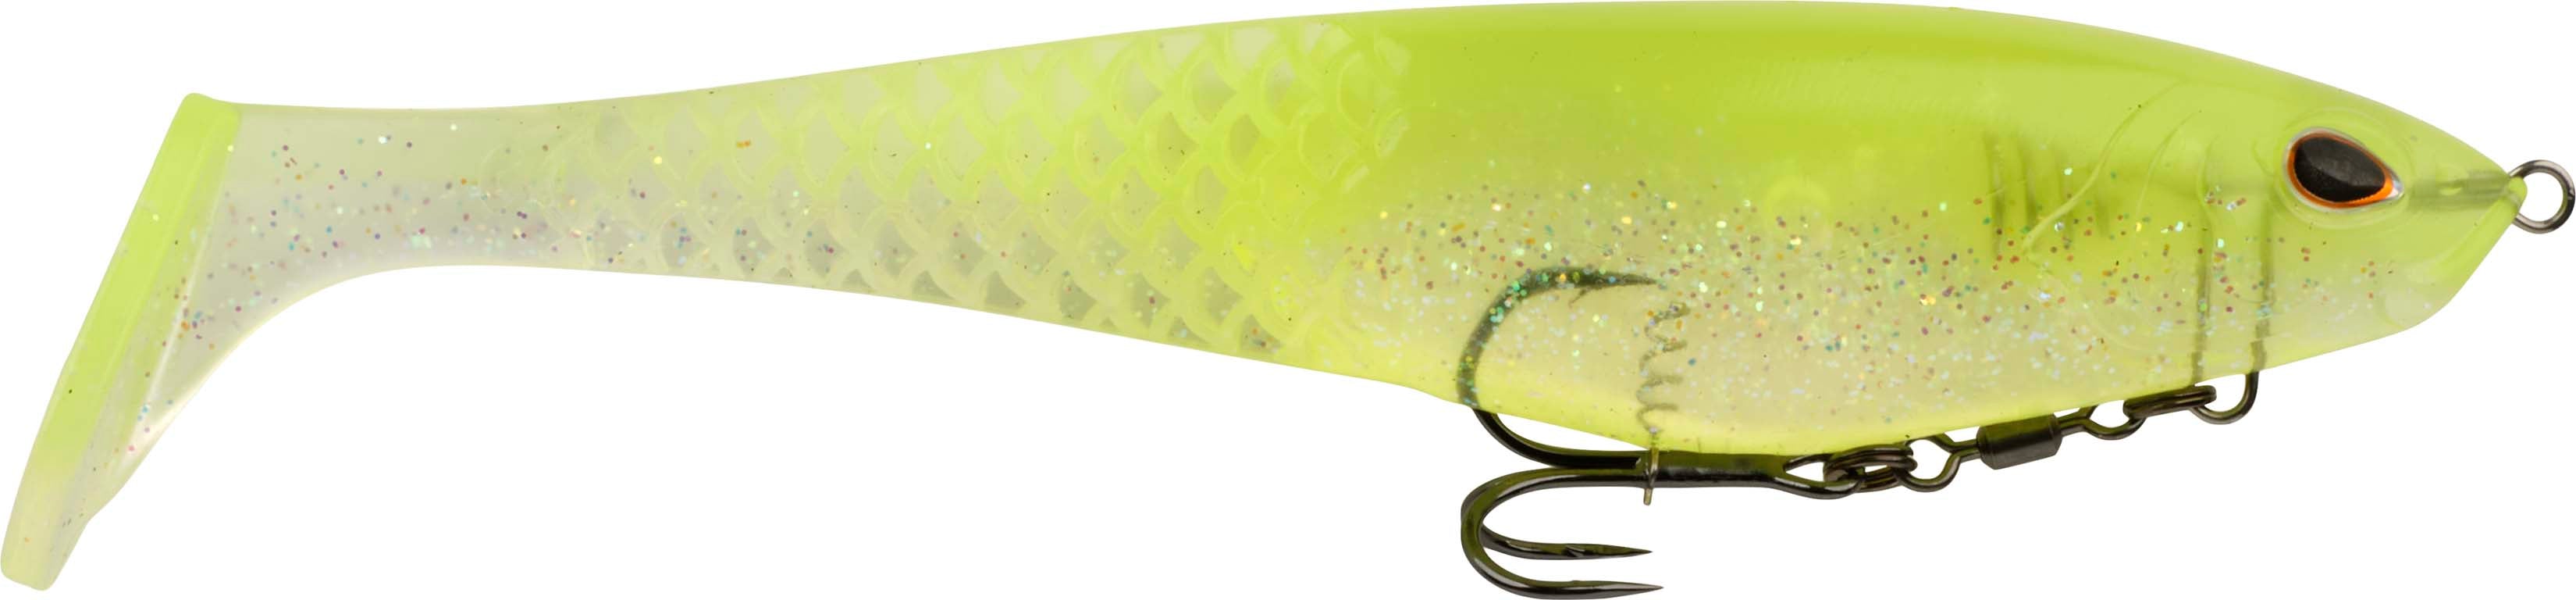 New Berkley PowerBait Lures: Transform Your Trout and Perch